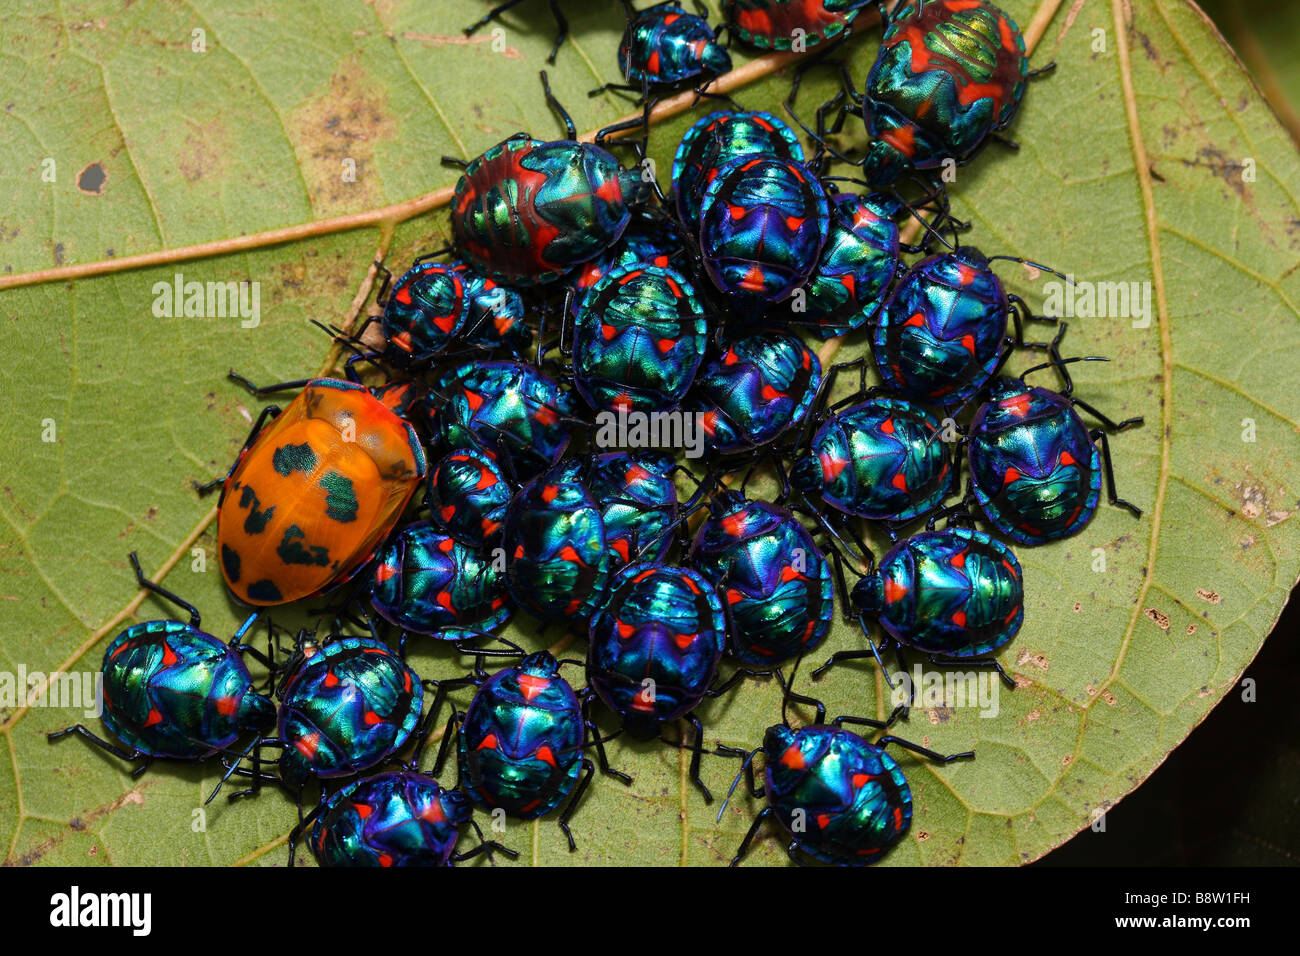 A female Cotton Harlequin Bug or Harlequin Beetle with her nymphs on a Hibiscus Tree Stock Photo